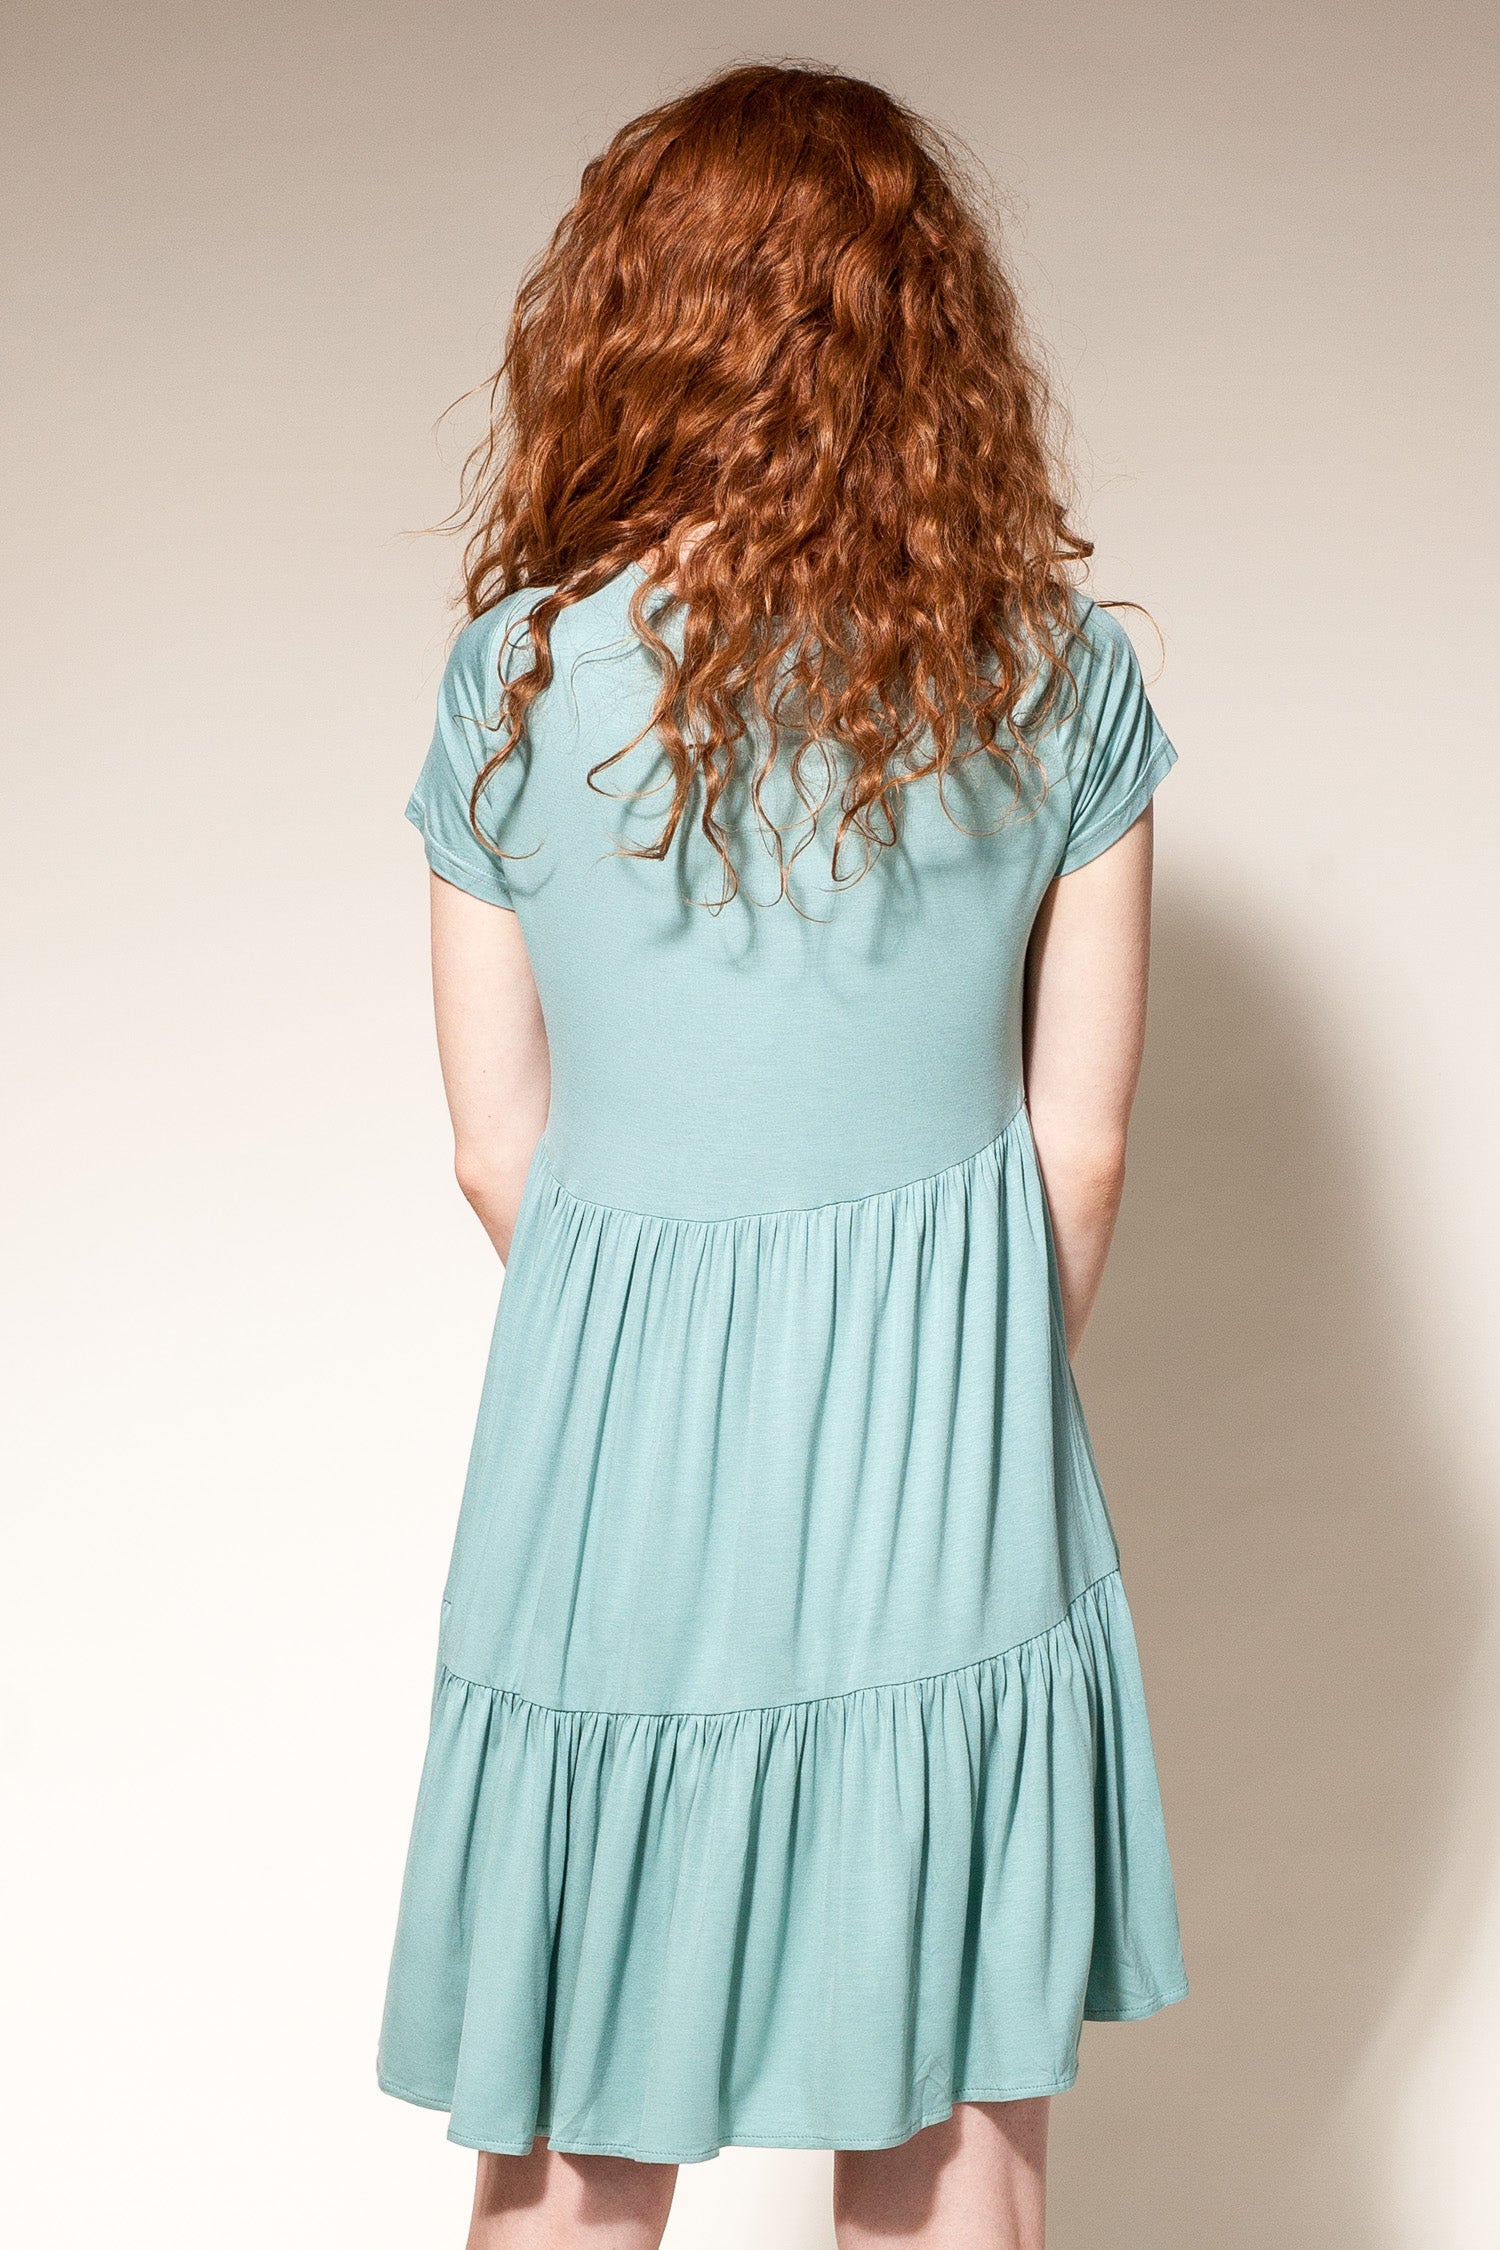 Lola Dress Green - Pink Martini Collection